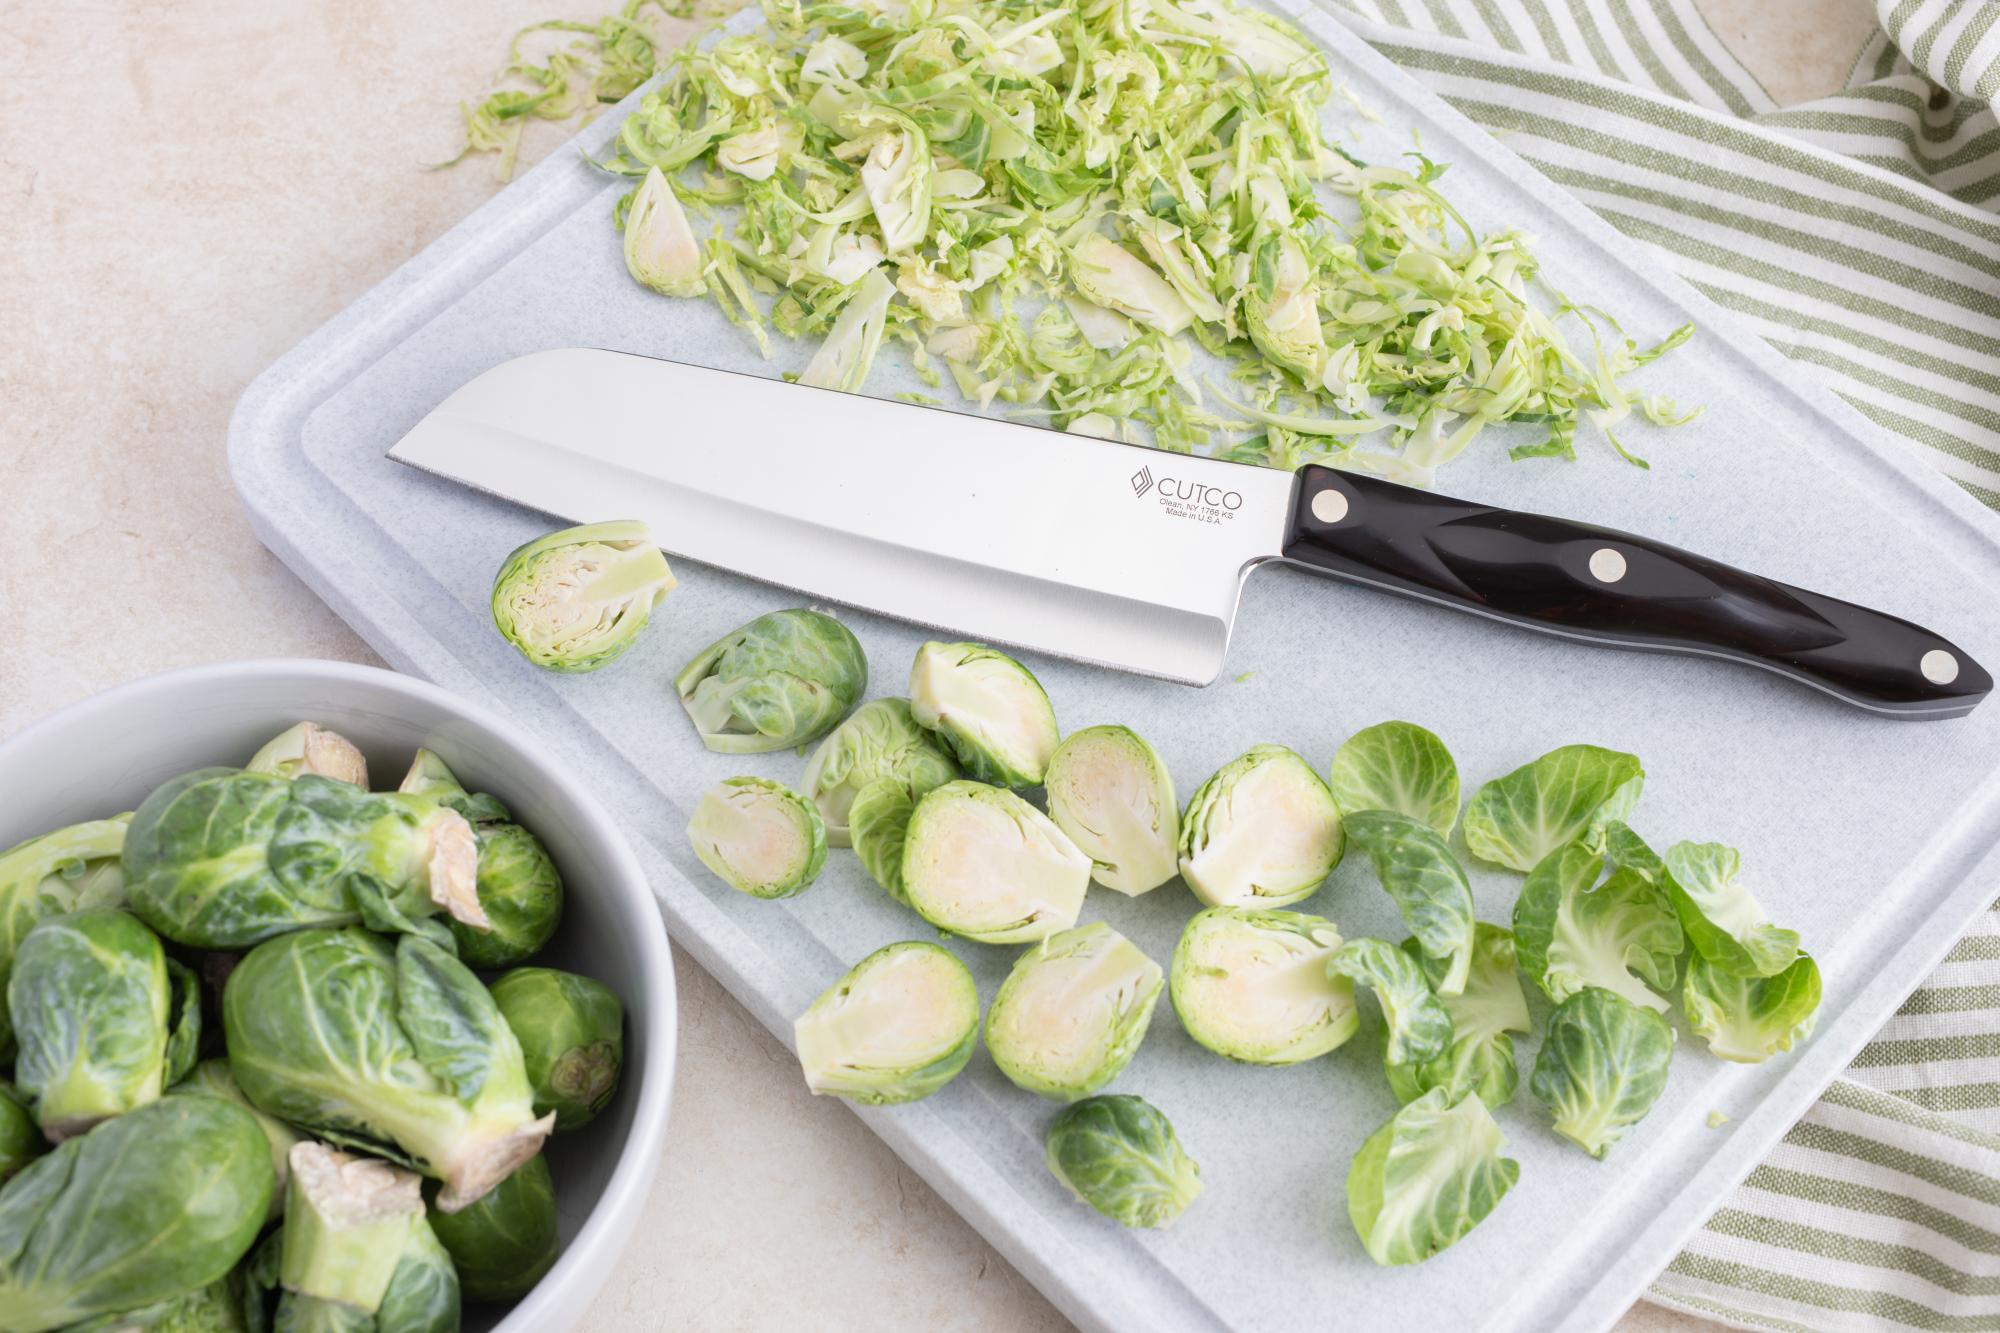 Santoku with sliced brussels sprouts